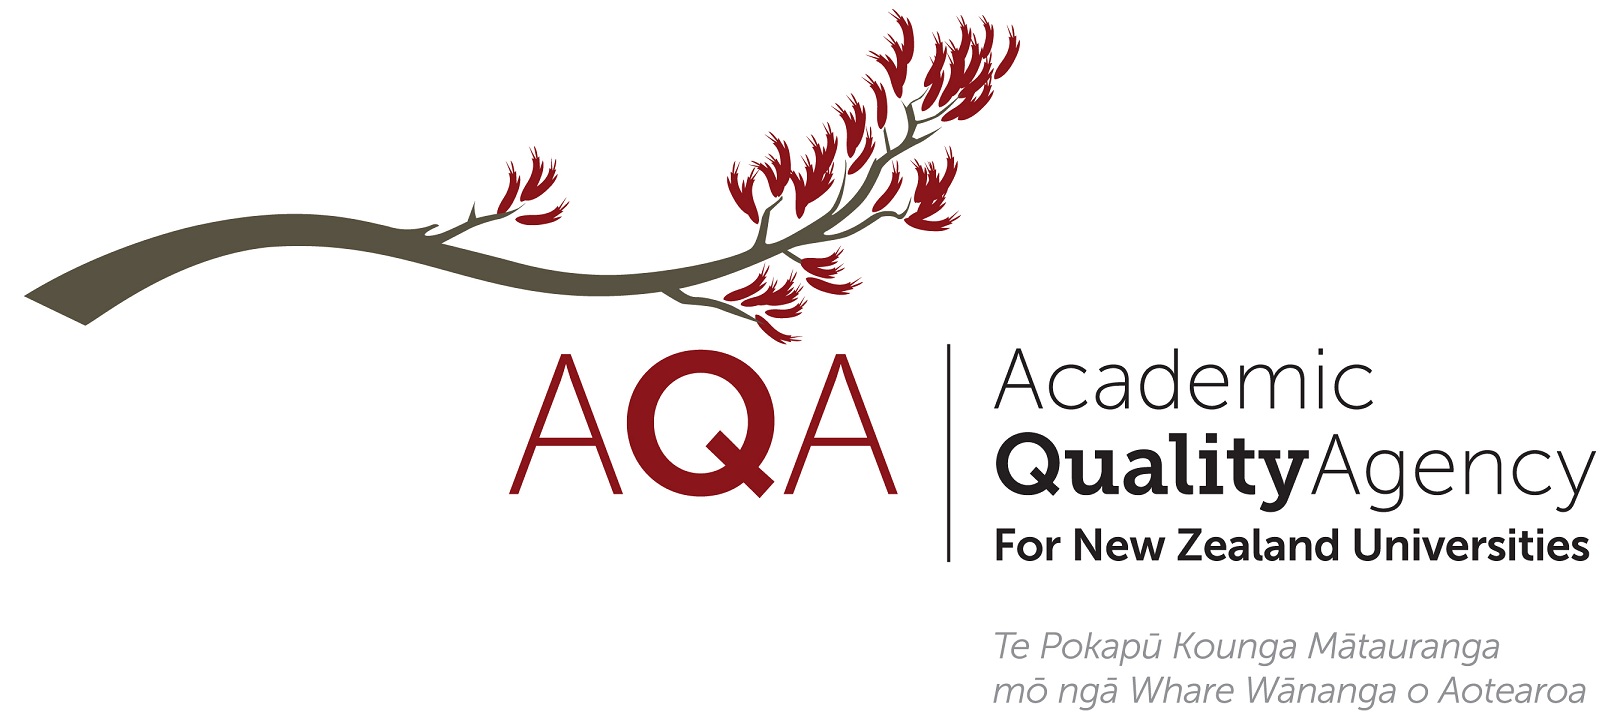 Academic Quality Agency for New Zealand universities